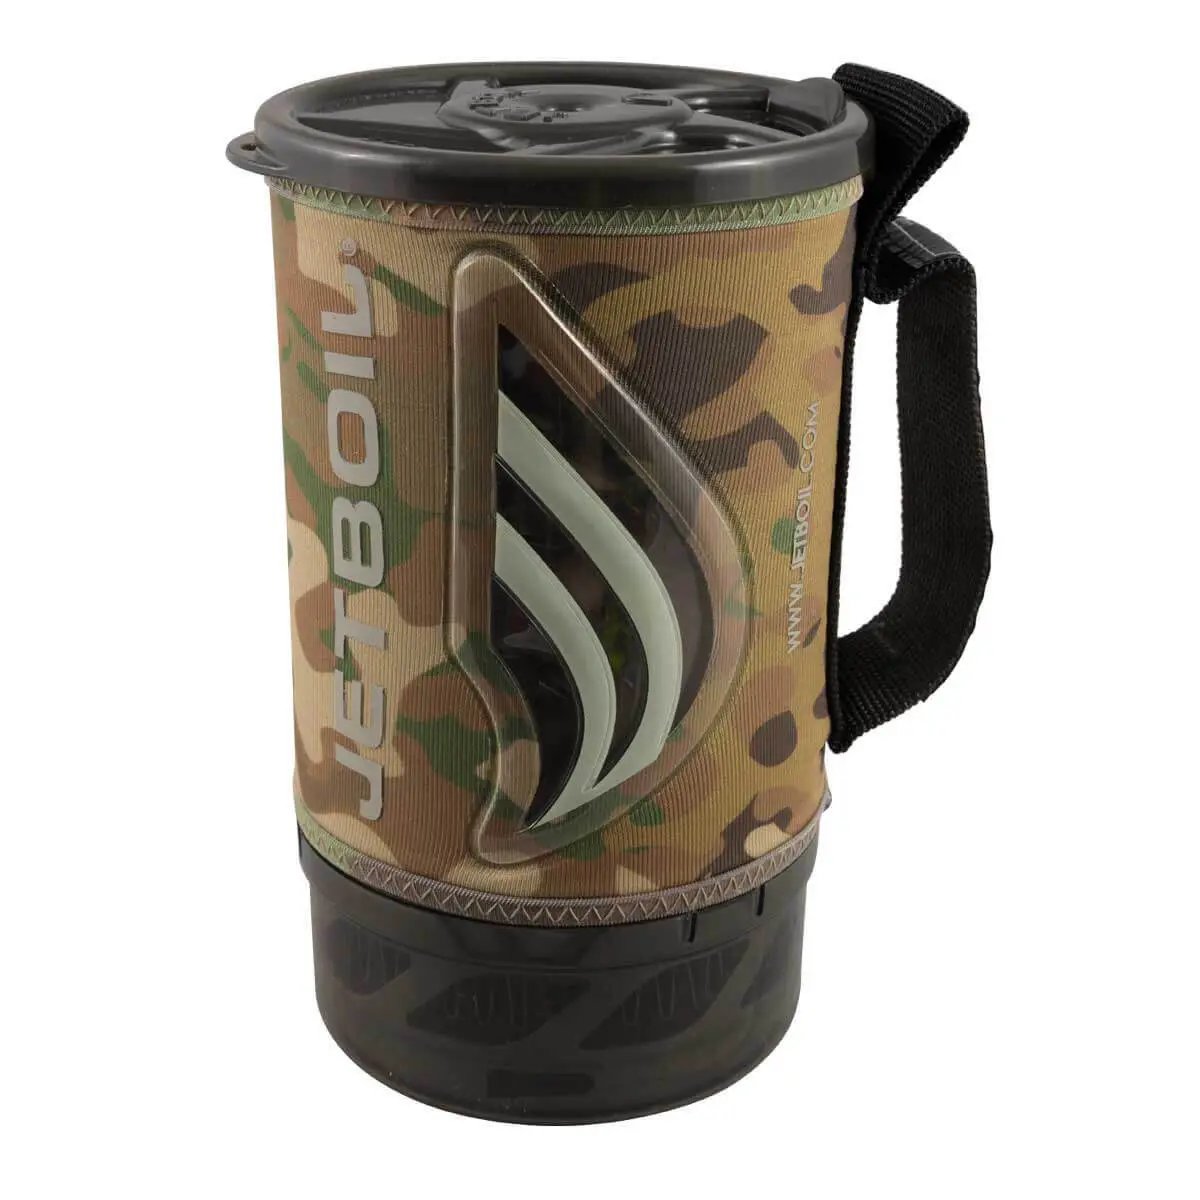 Jetboil Flash Camo 1L Personal Cooking Stove - John Bull Clothing